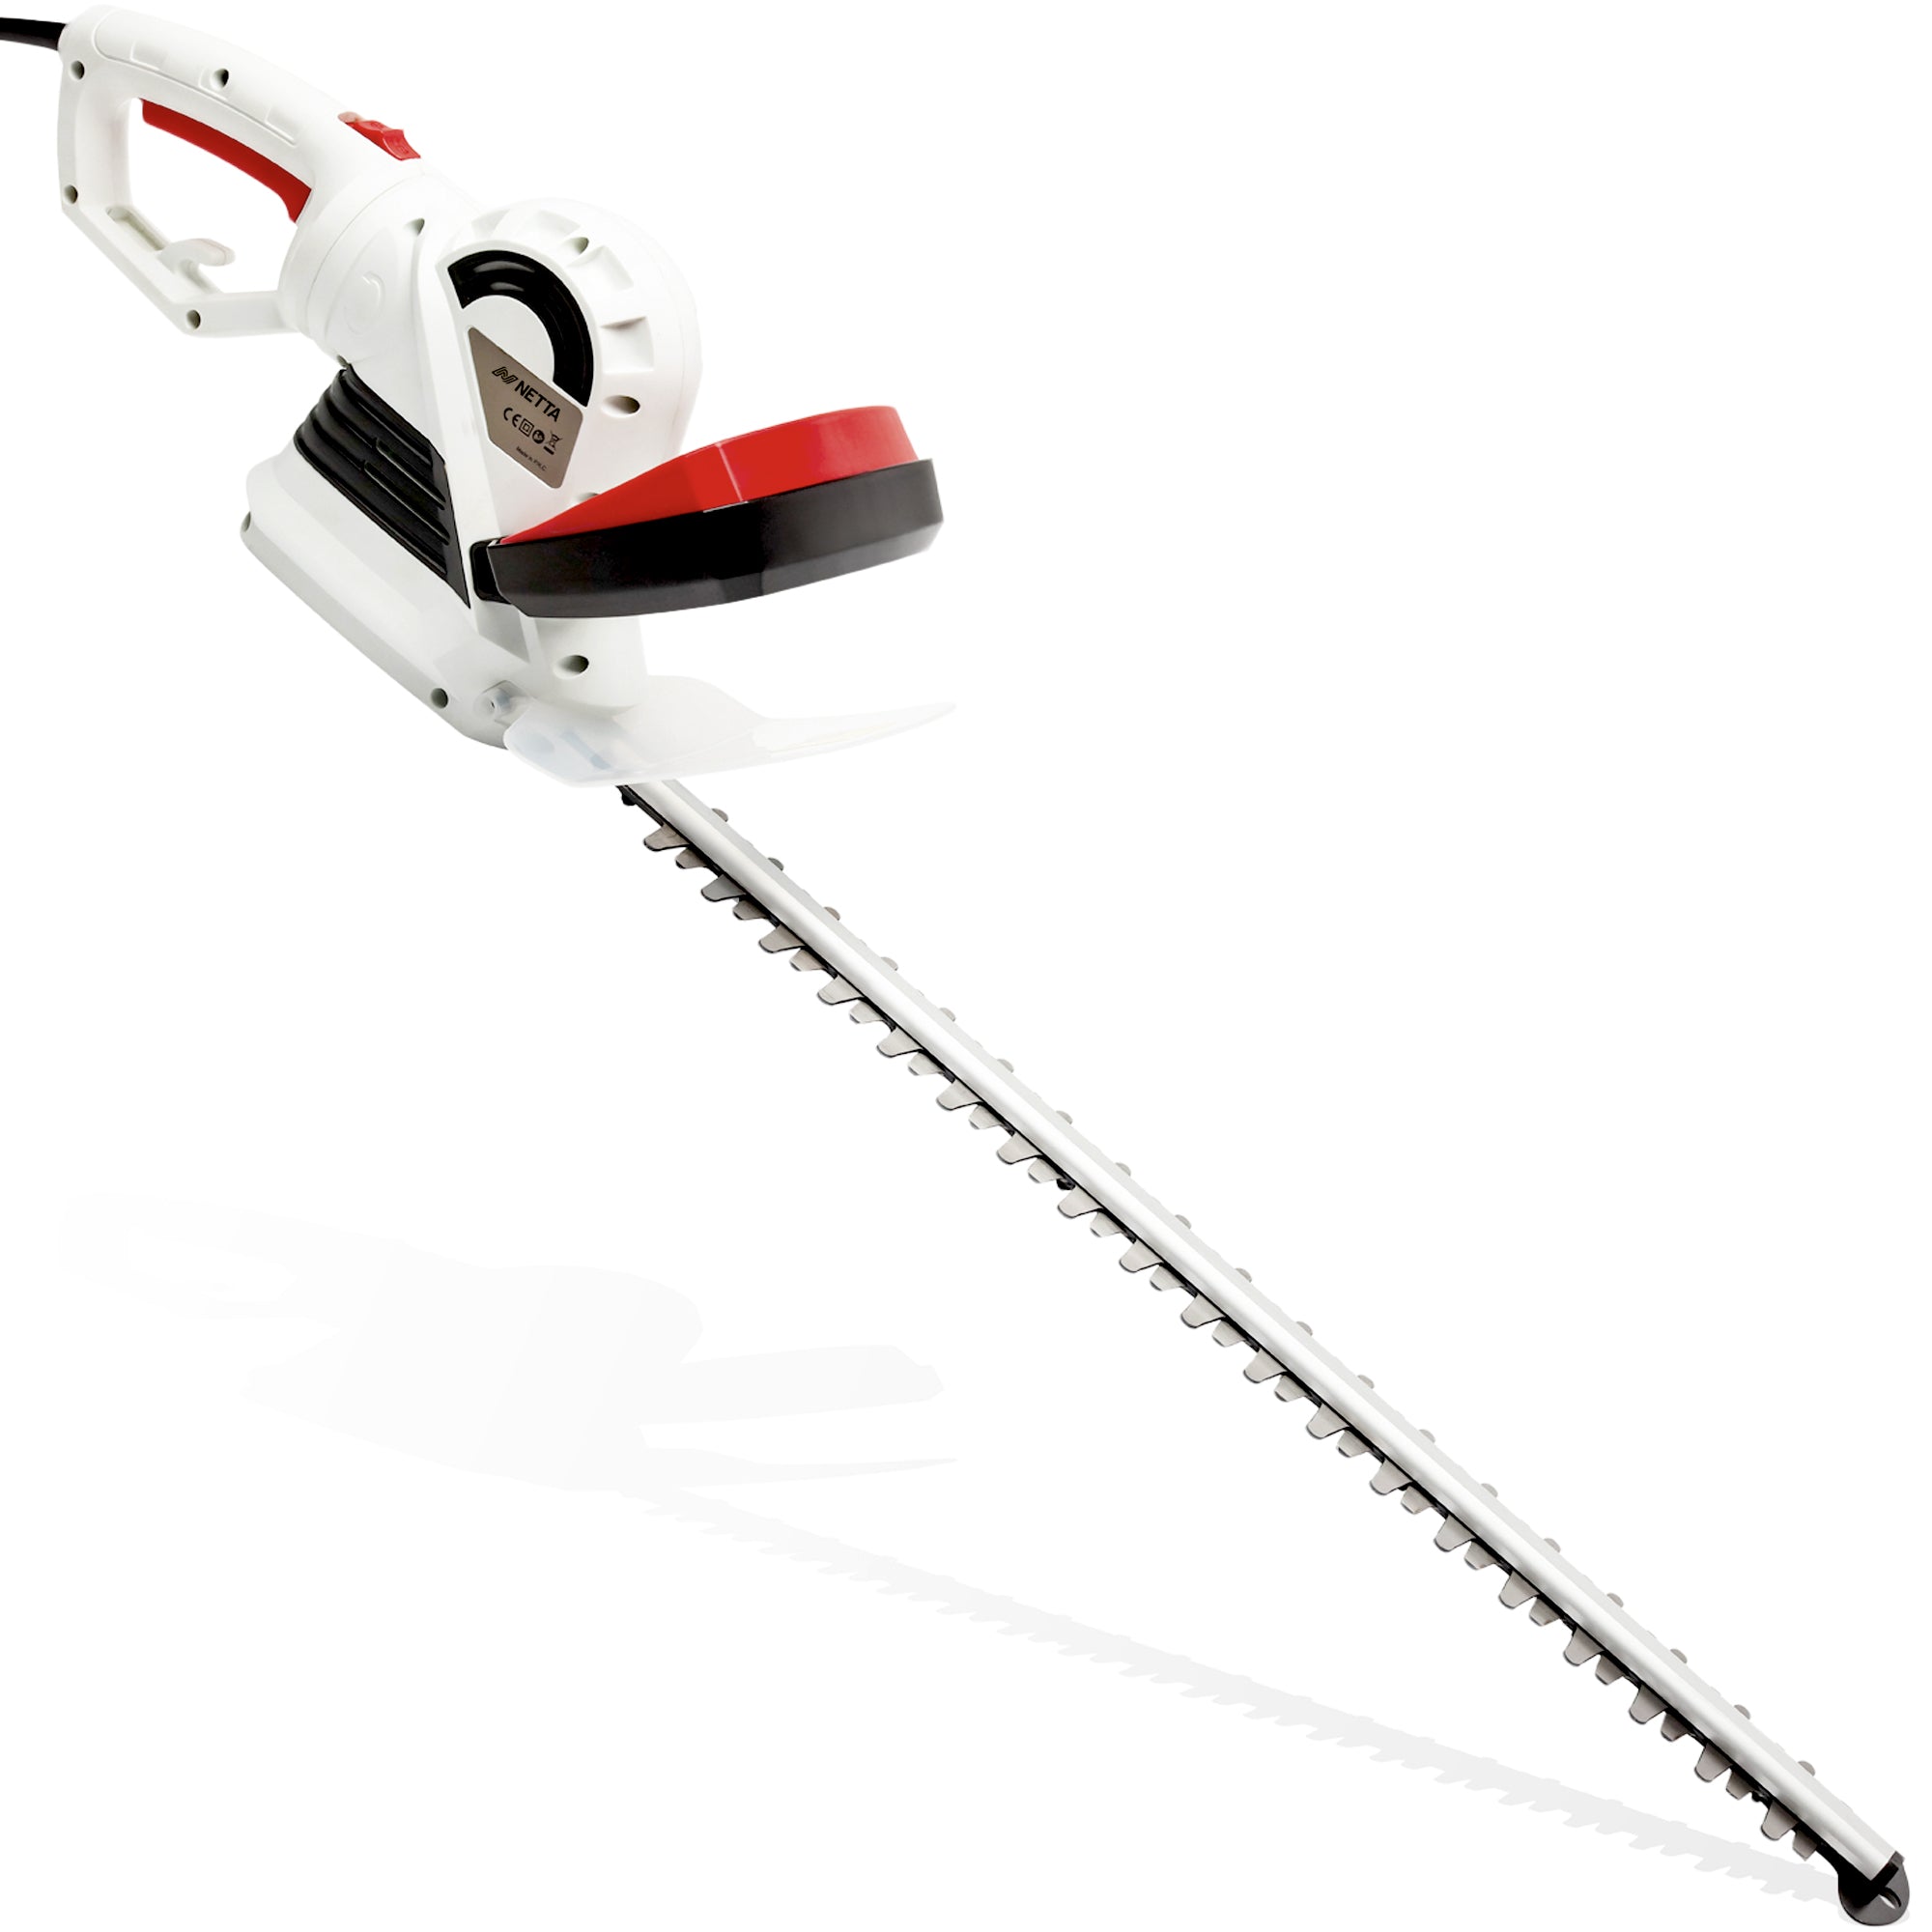 NETTA 710W Corded Hedge Trimmer 66CM Diamond Cutting Blade with Rotating Handle